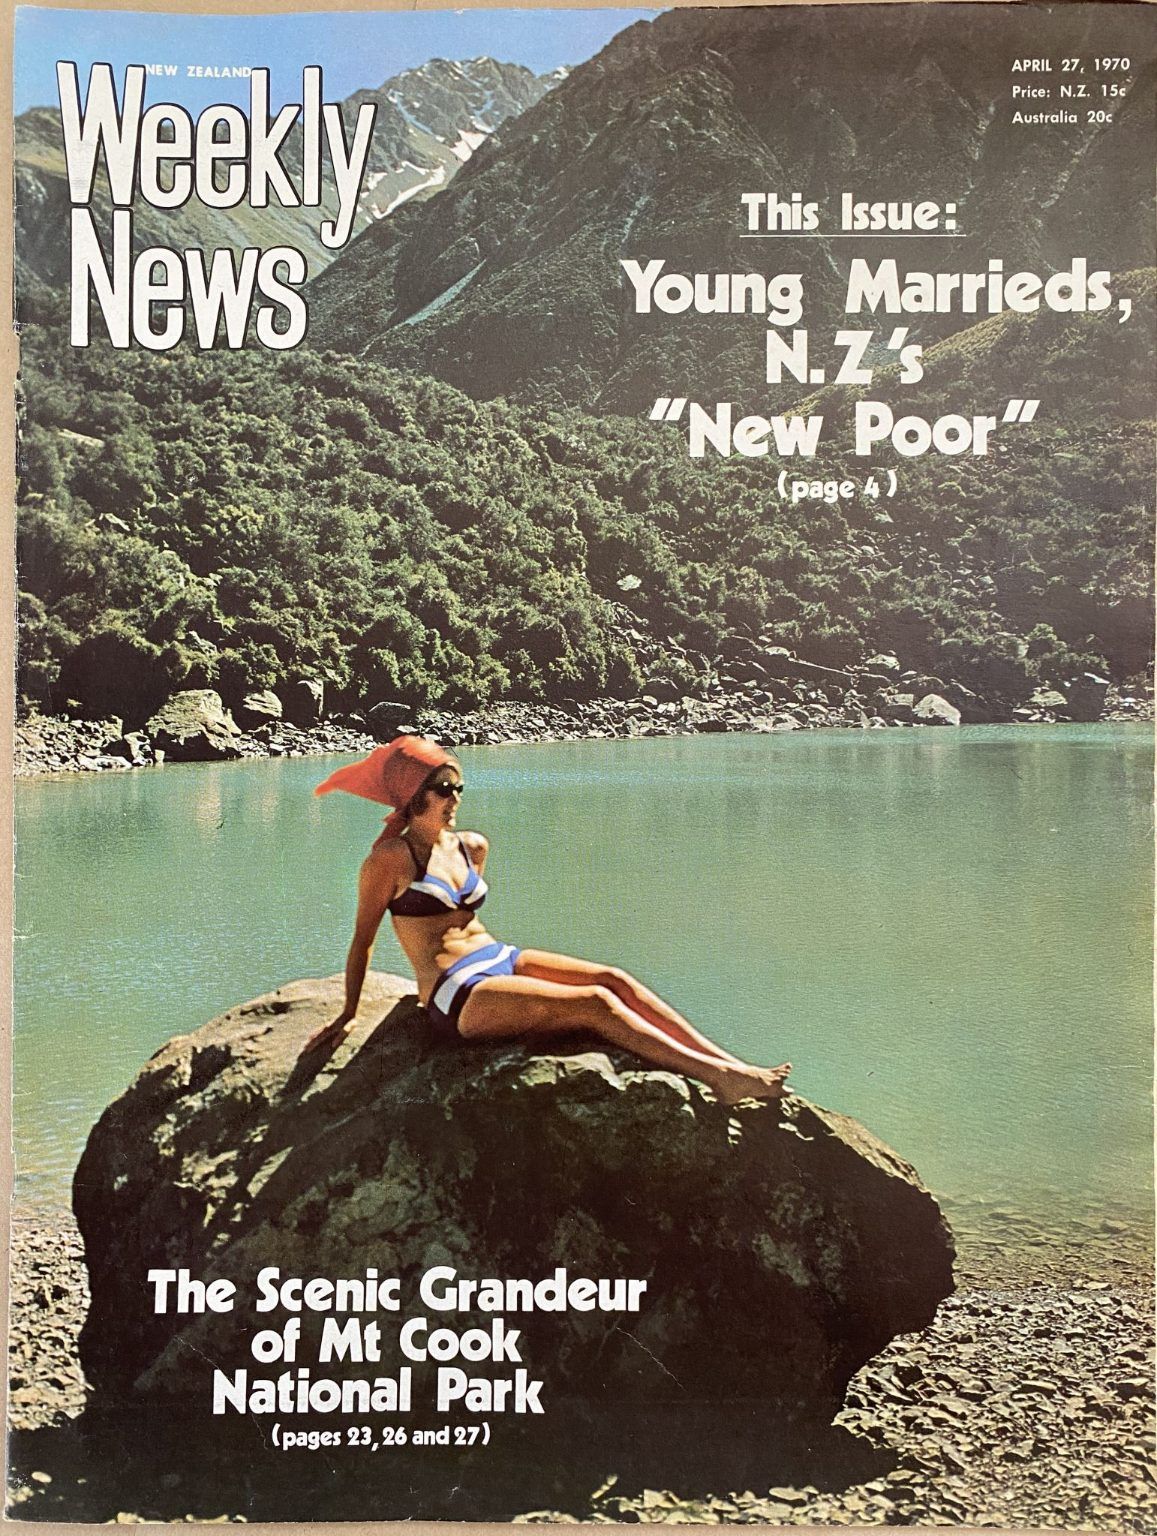 OLD NEWSPAPER: New Zealand Weekly News, No. 5551, 27 April 1970